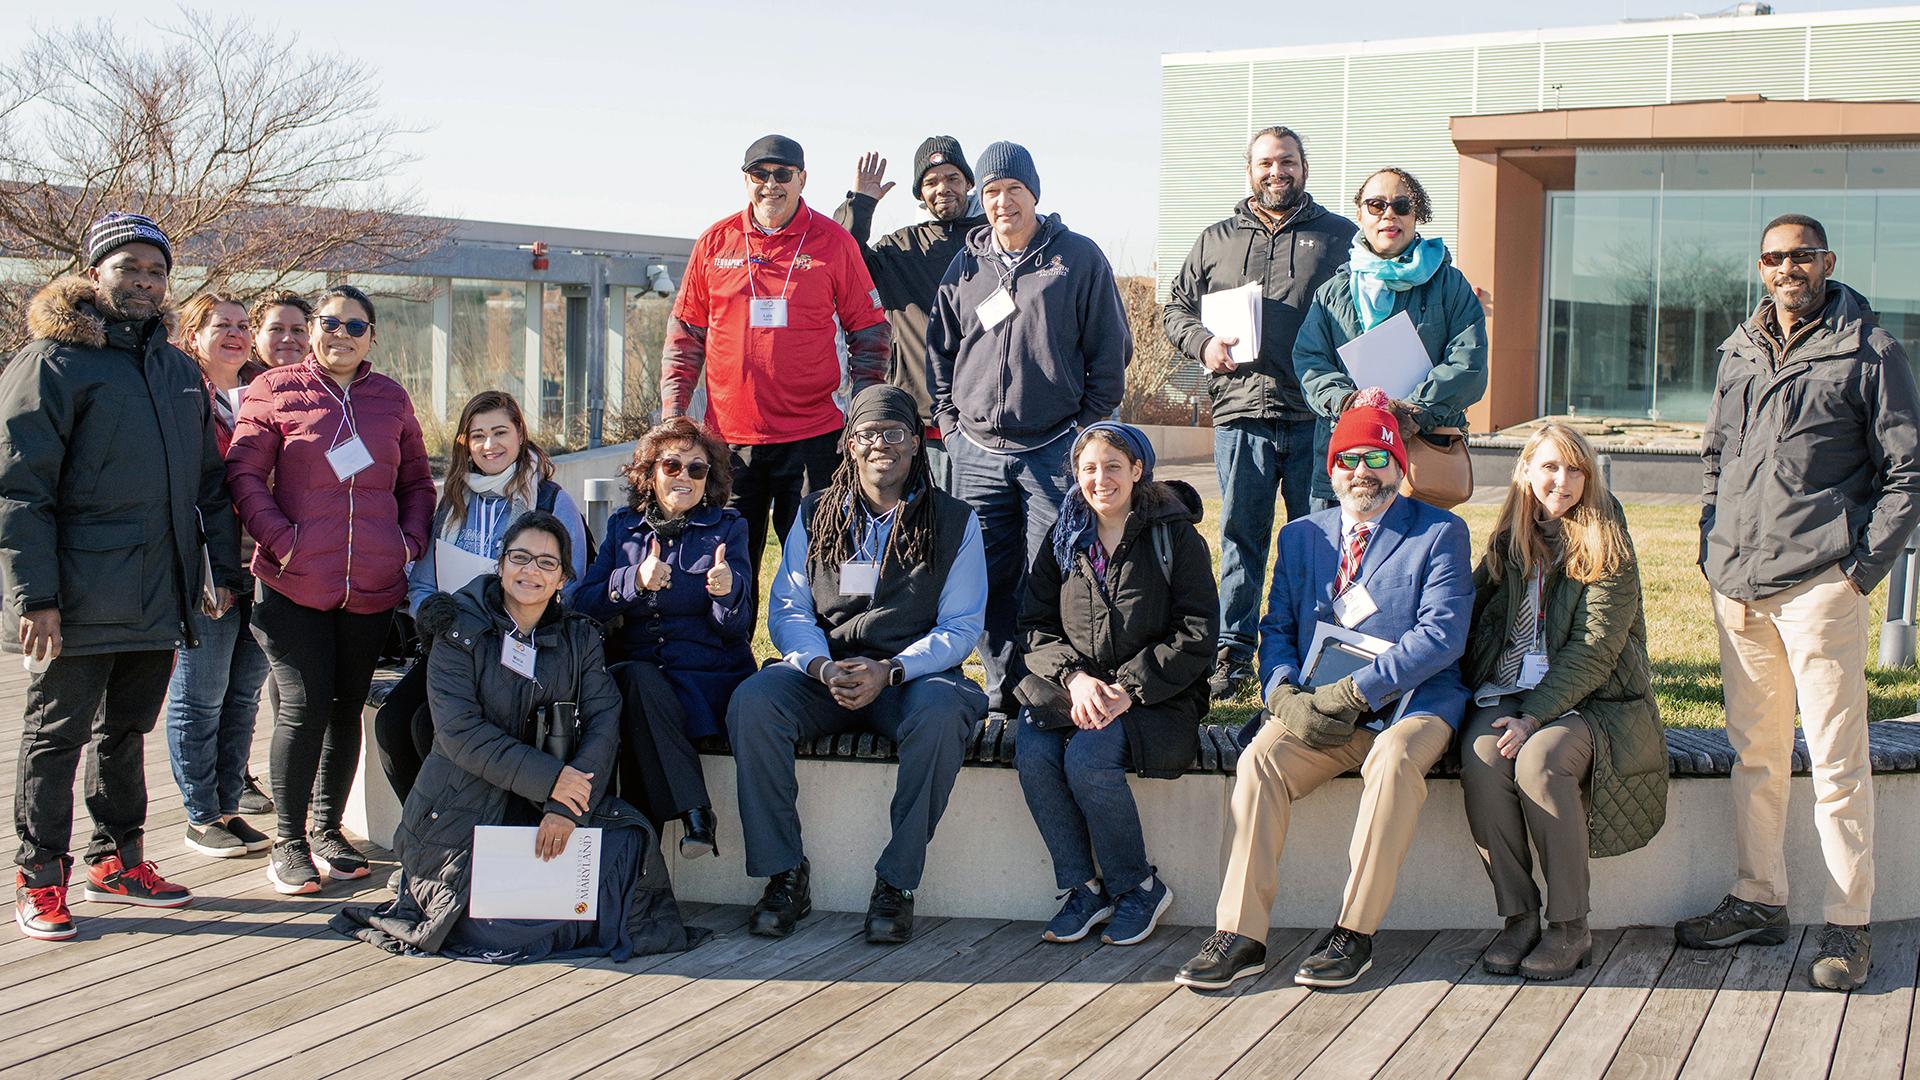 ResFac staff gather on a roof of a building to take a photo together